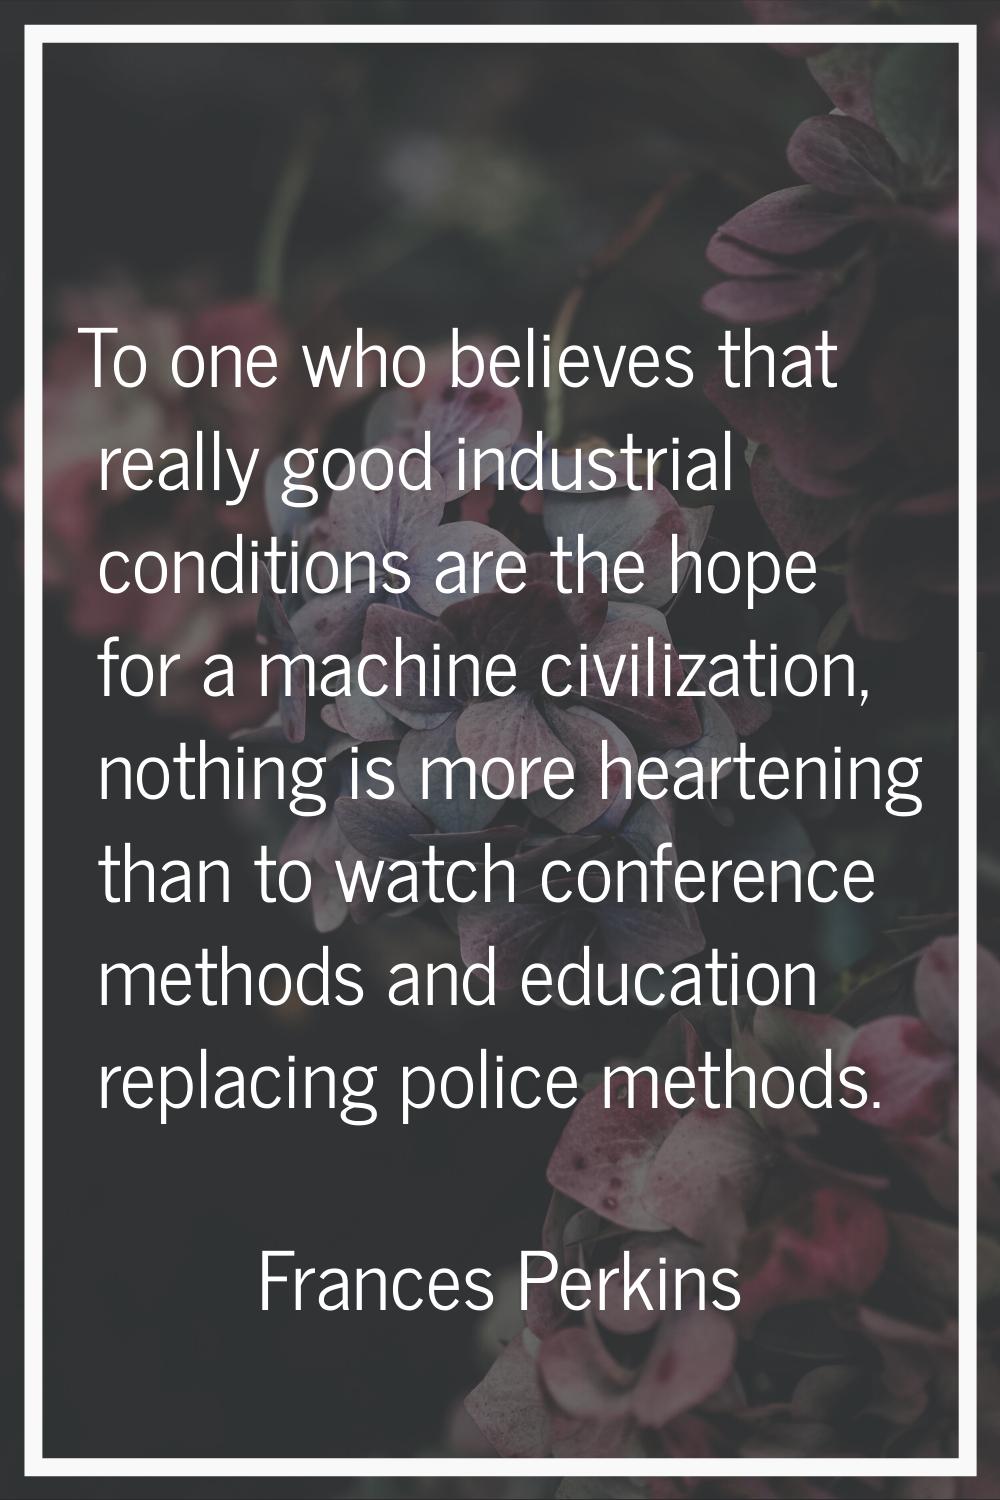 To one who believes that really good industrial conditions are the hope for a machine civilization,